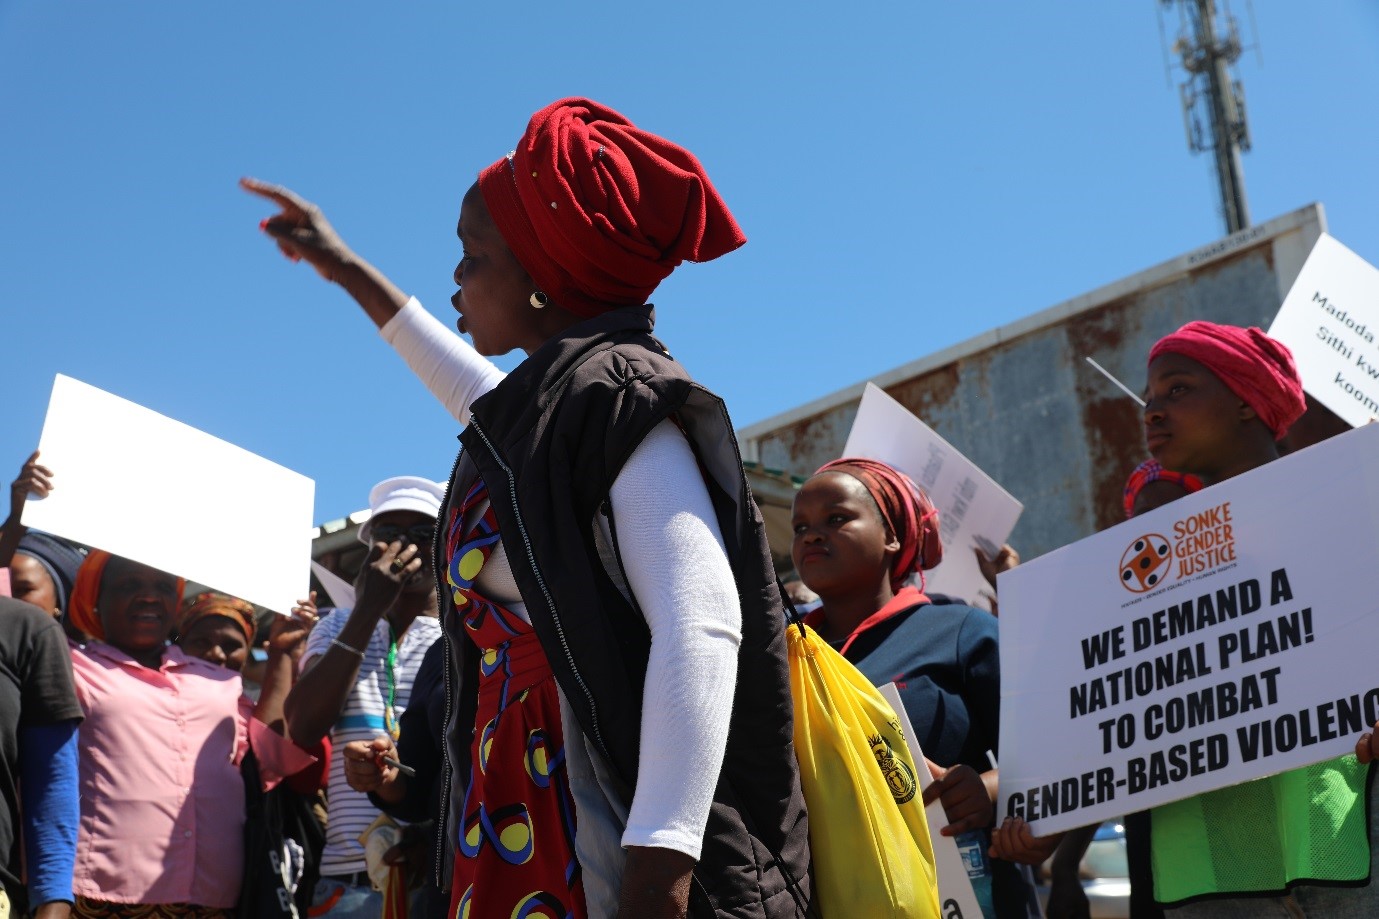 Campaigning for a National Coordinating Structure to end Gender-Based Violence in South Africa